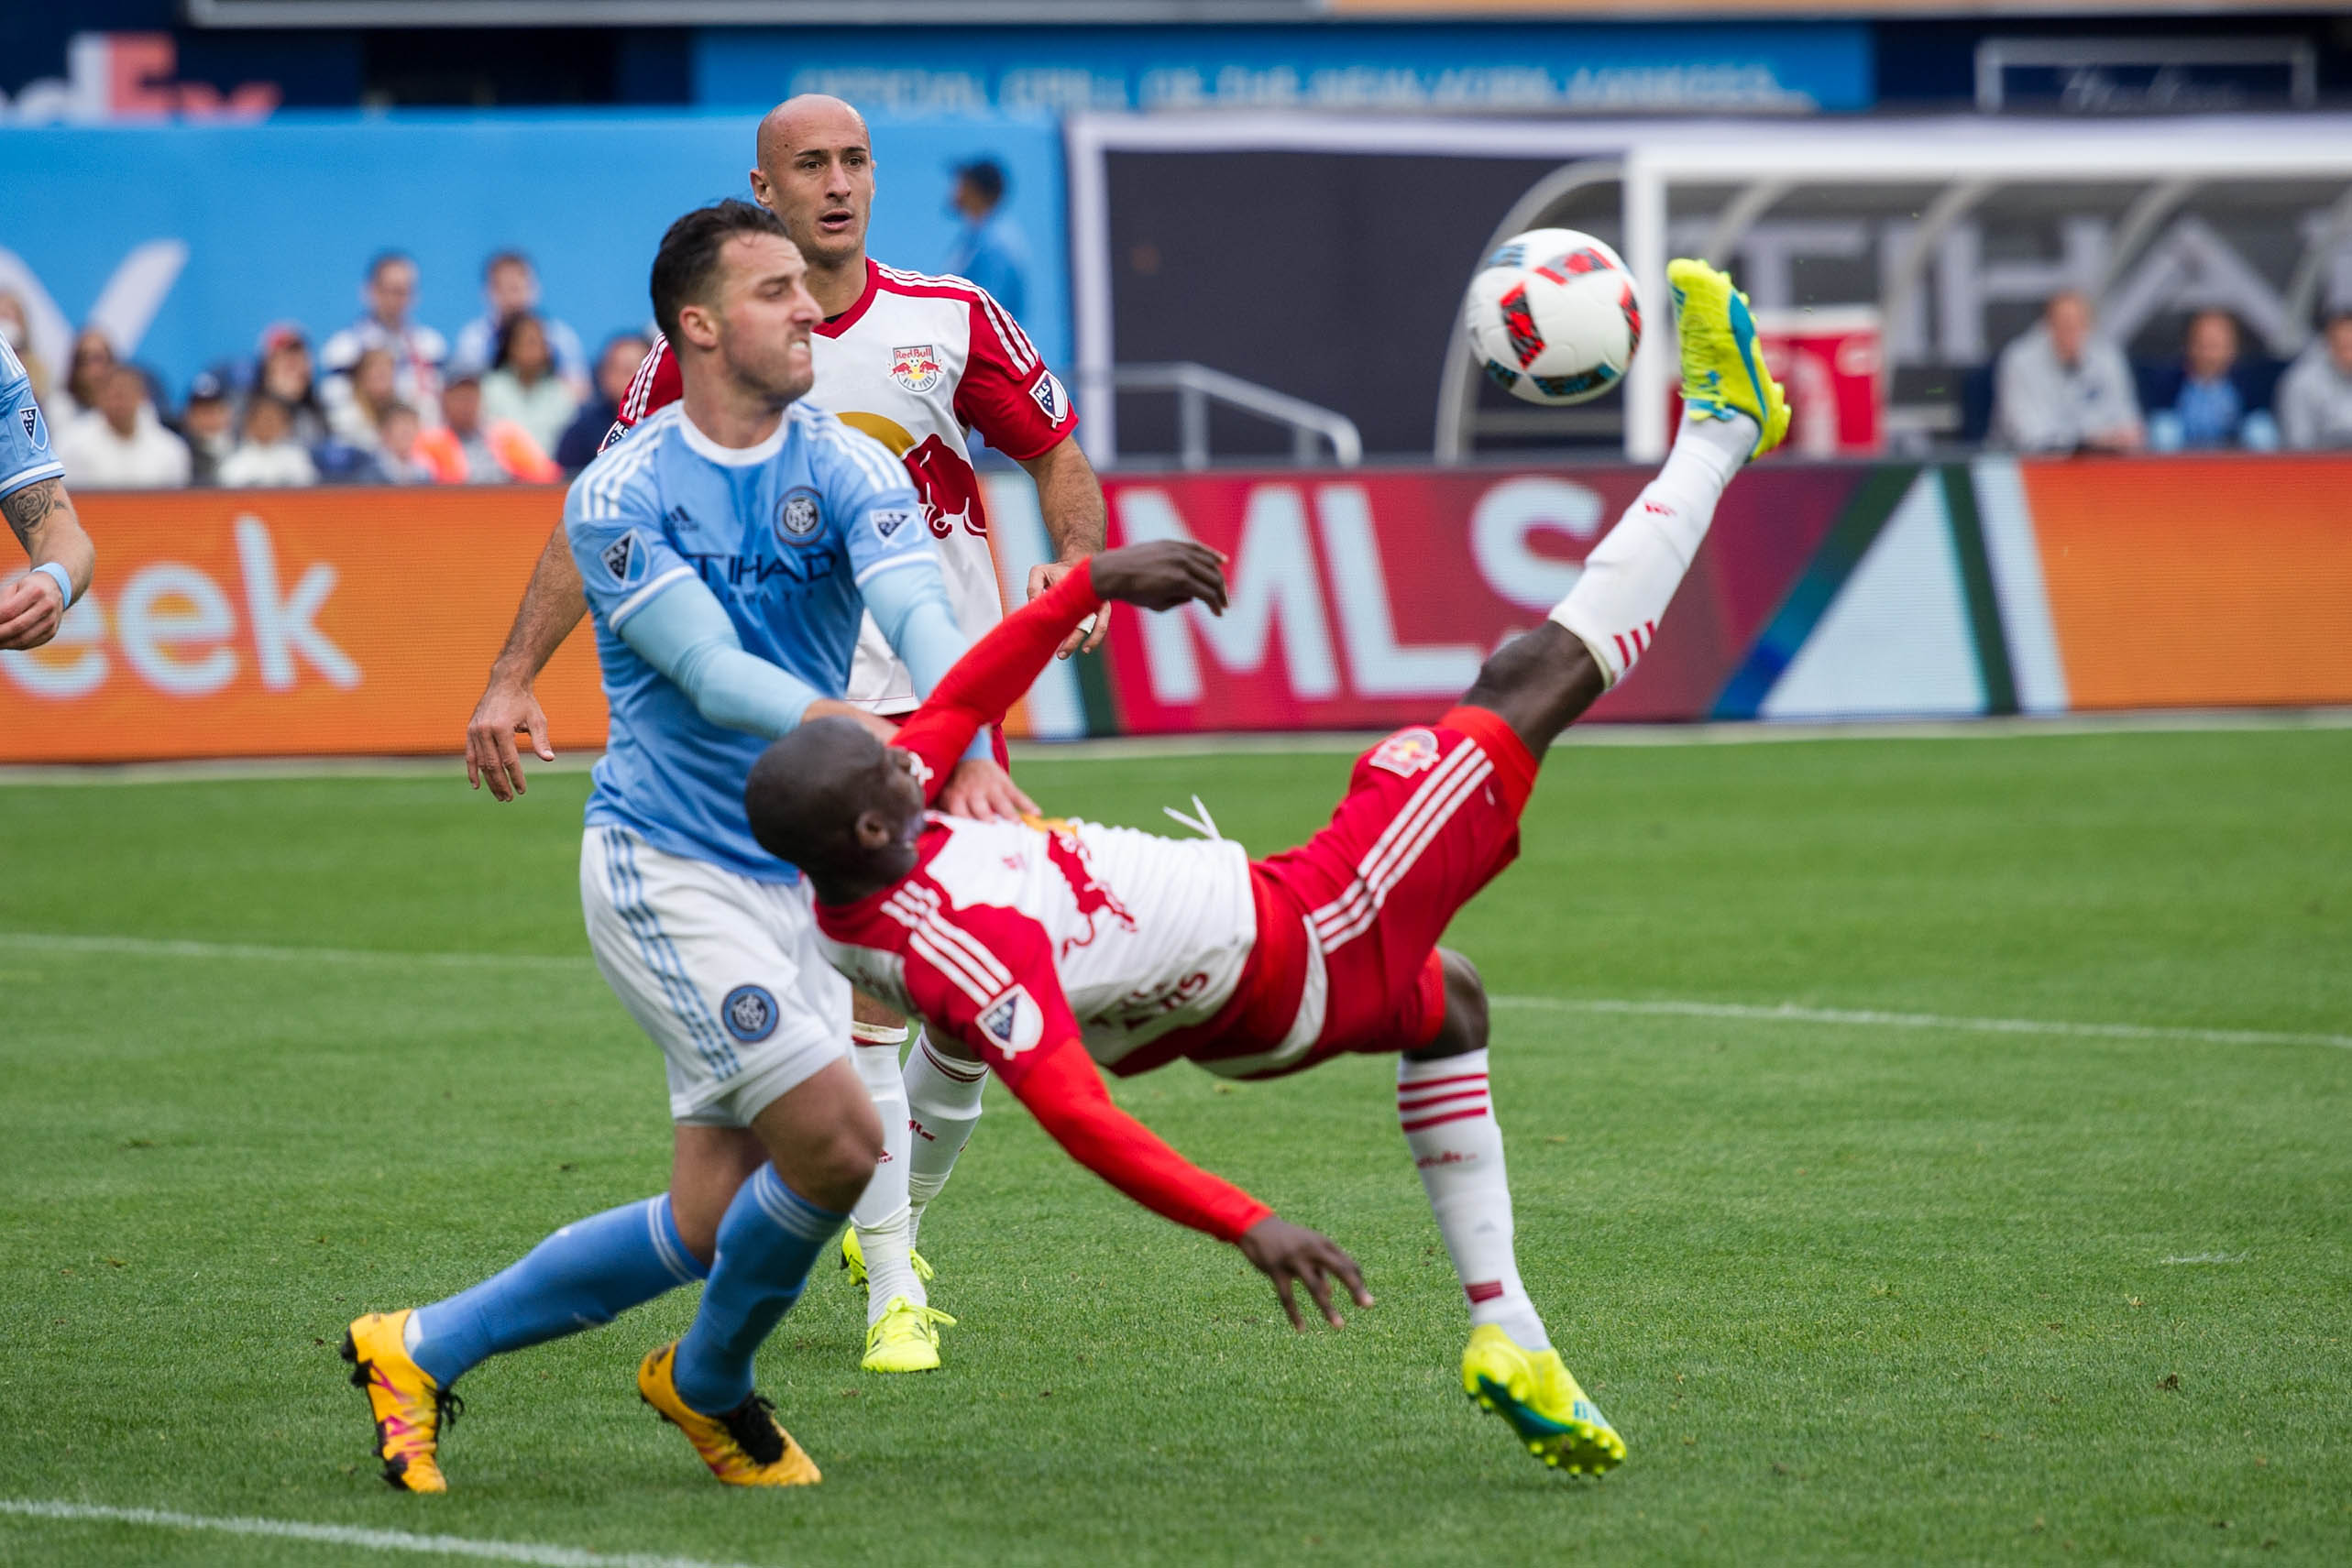 May 21, 2016; New York, NY, USA; New York Red Bulls forward Bradley Wright-Phillips (99) scores a goal with a bicycle kick against the New York FC in the first half at Yankee Stadium. Mandatory Credit: William Hauser-USA TODAY Sports